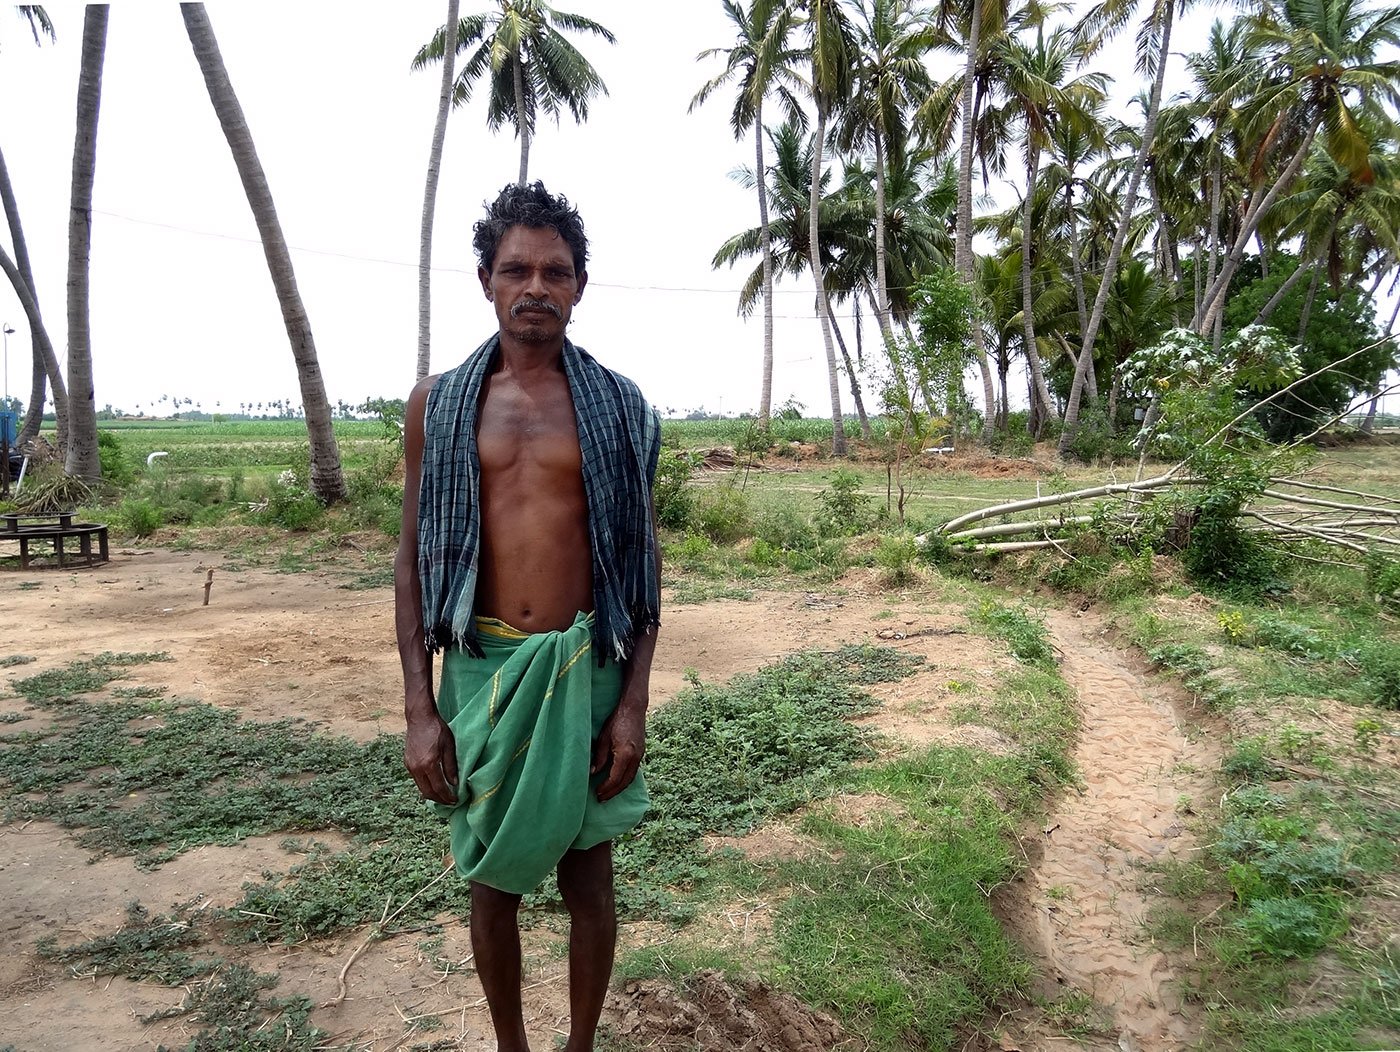 K Lekan, fondly known in his village as Settu, stands against the backdrop of wilting farms in his village Thayanur, 25 km from Trichy town, lucky to have survived a suicide bid earlier this year amidst a raging drought.
